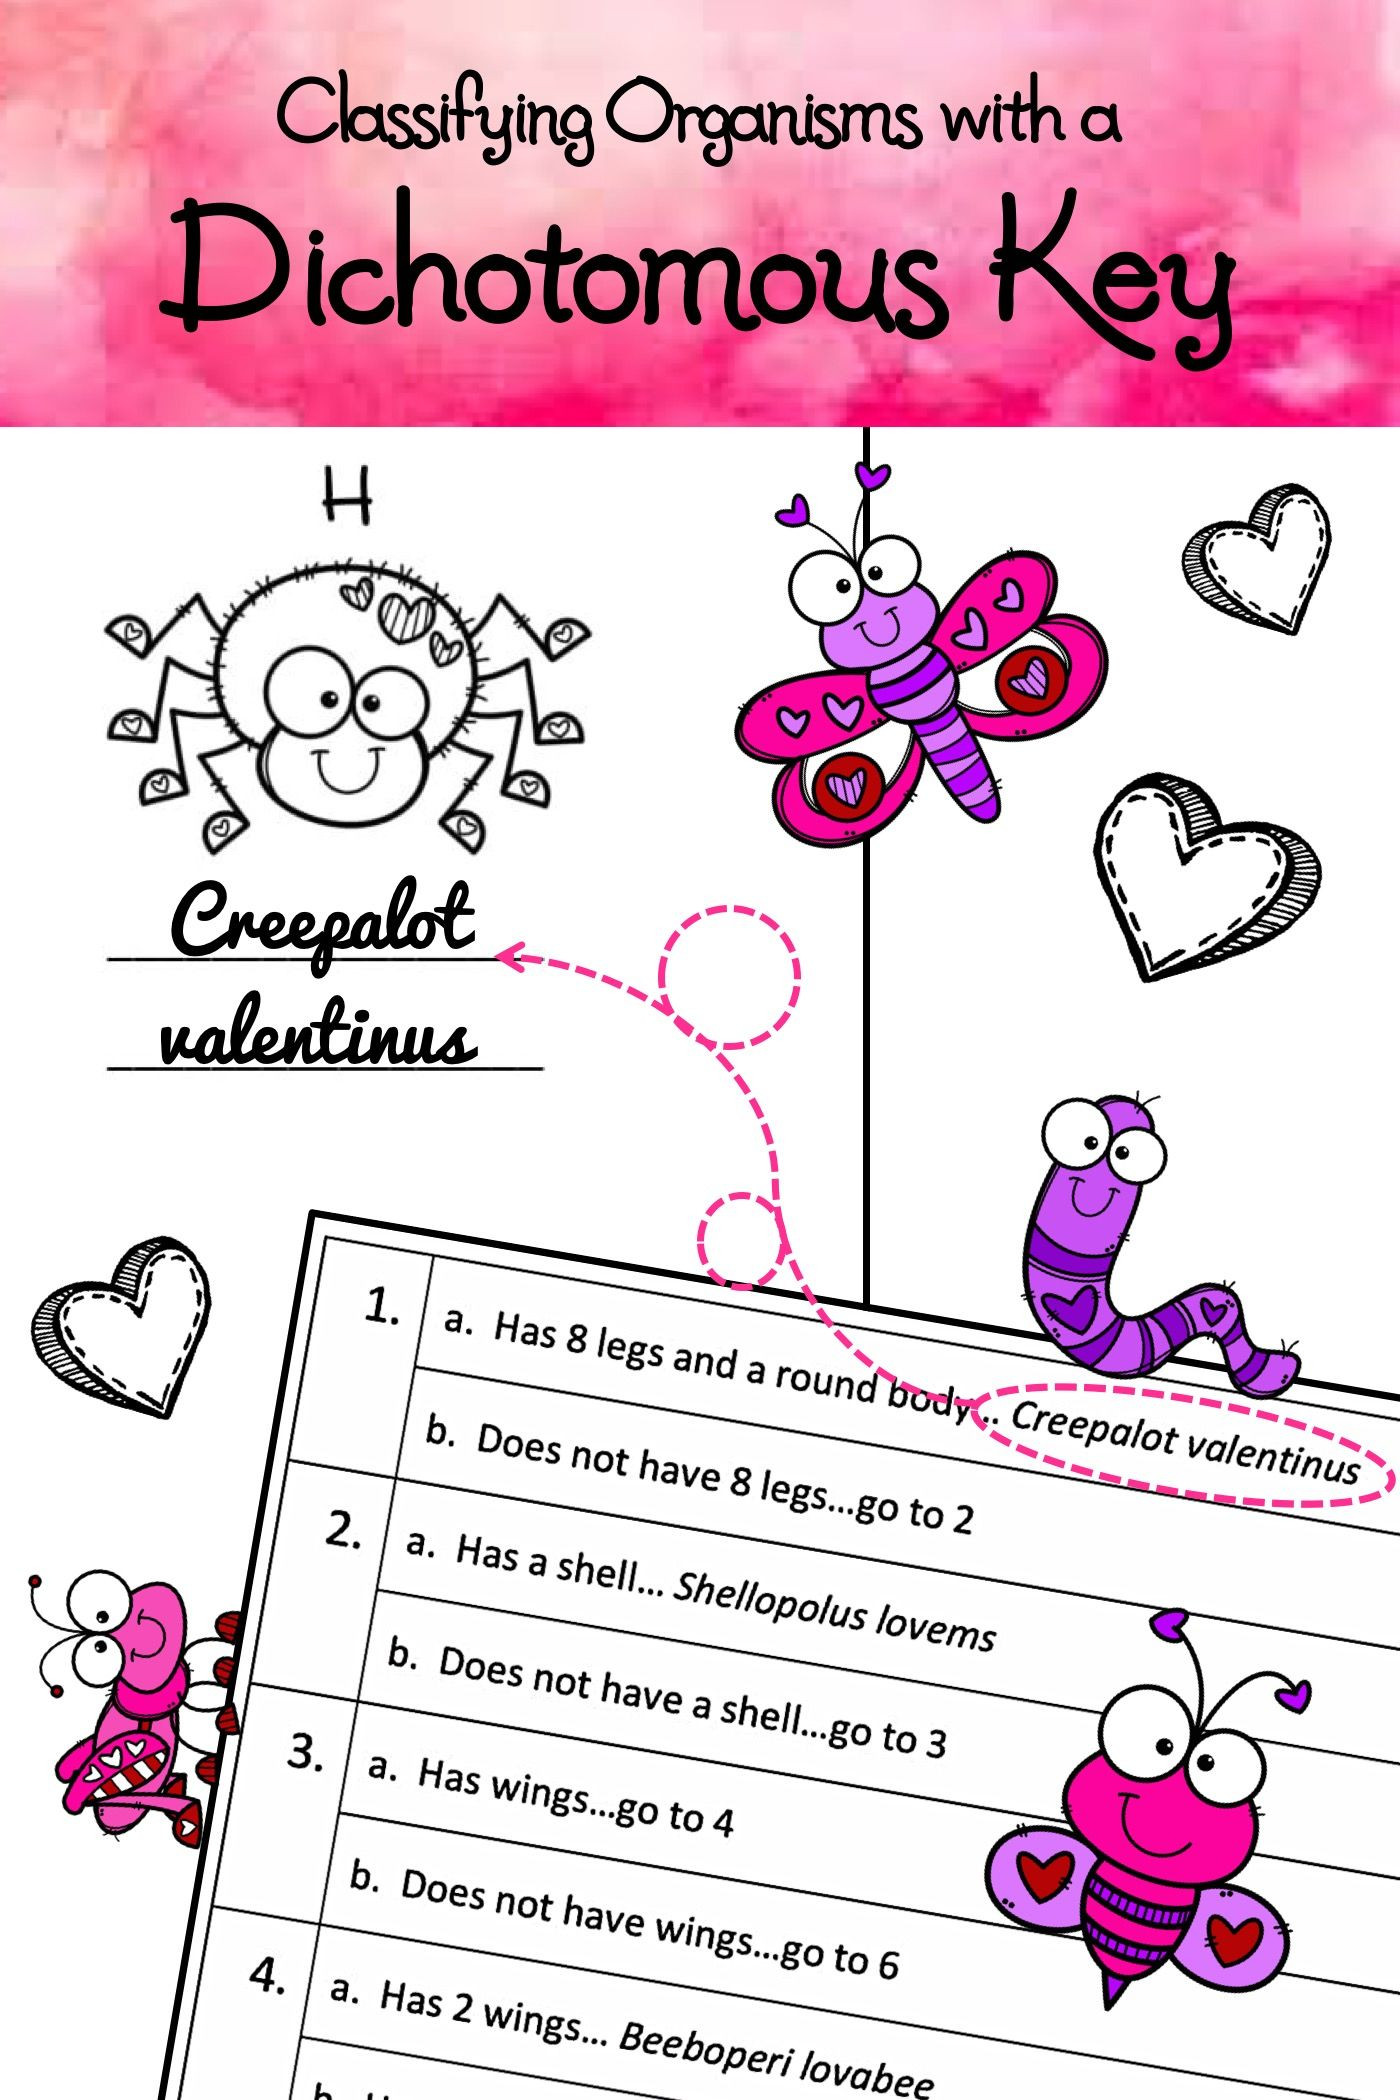 Dichotomous Key Worksheet Middle School Valentine S Day Science Activity Classifying organisms